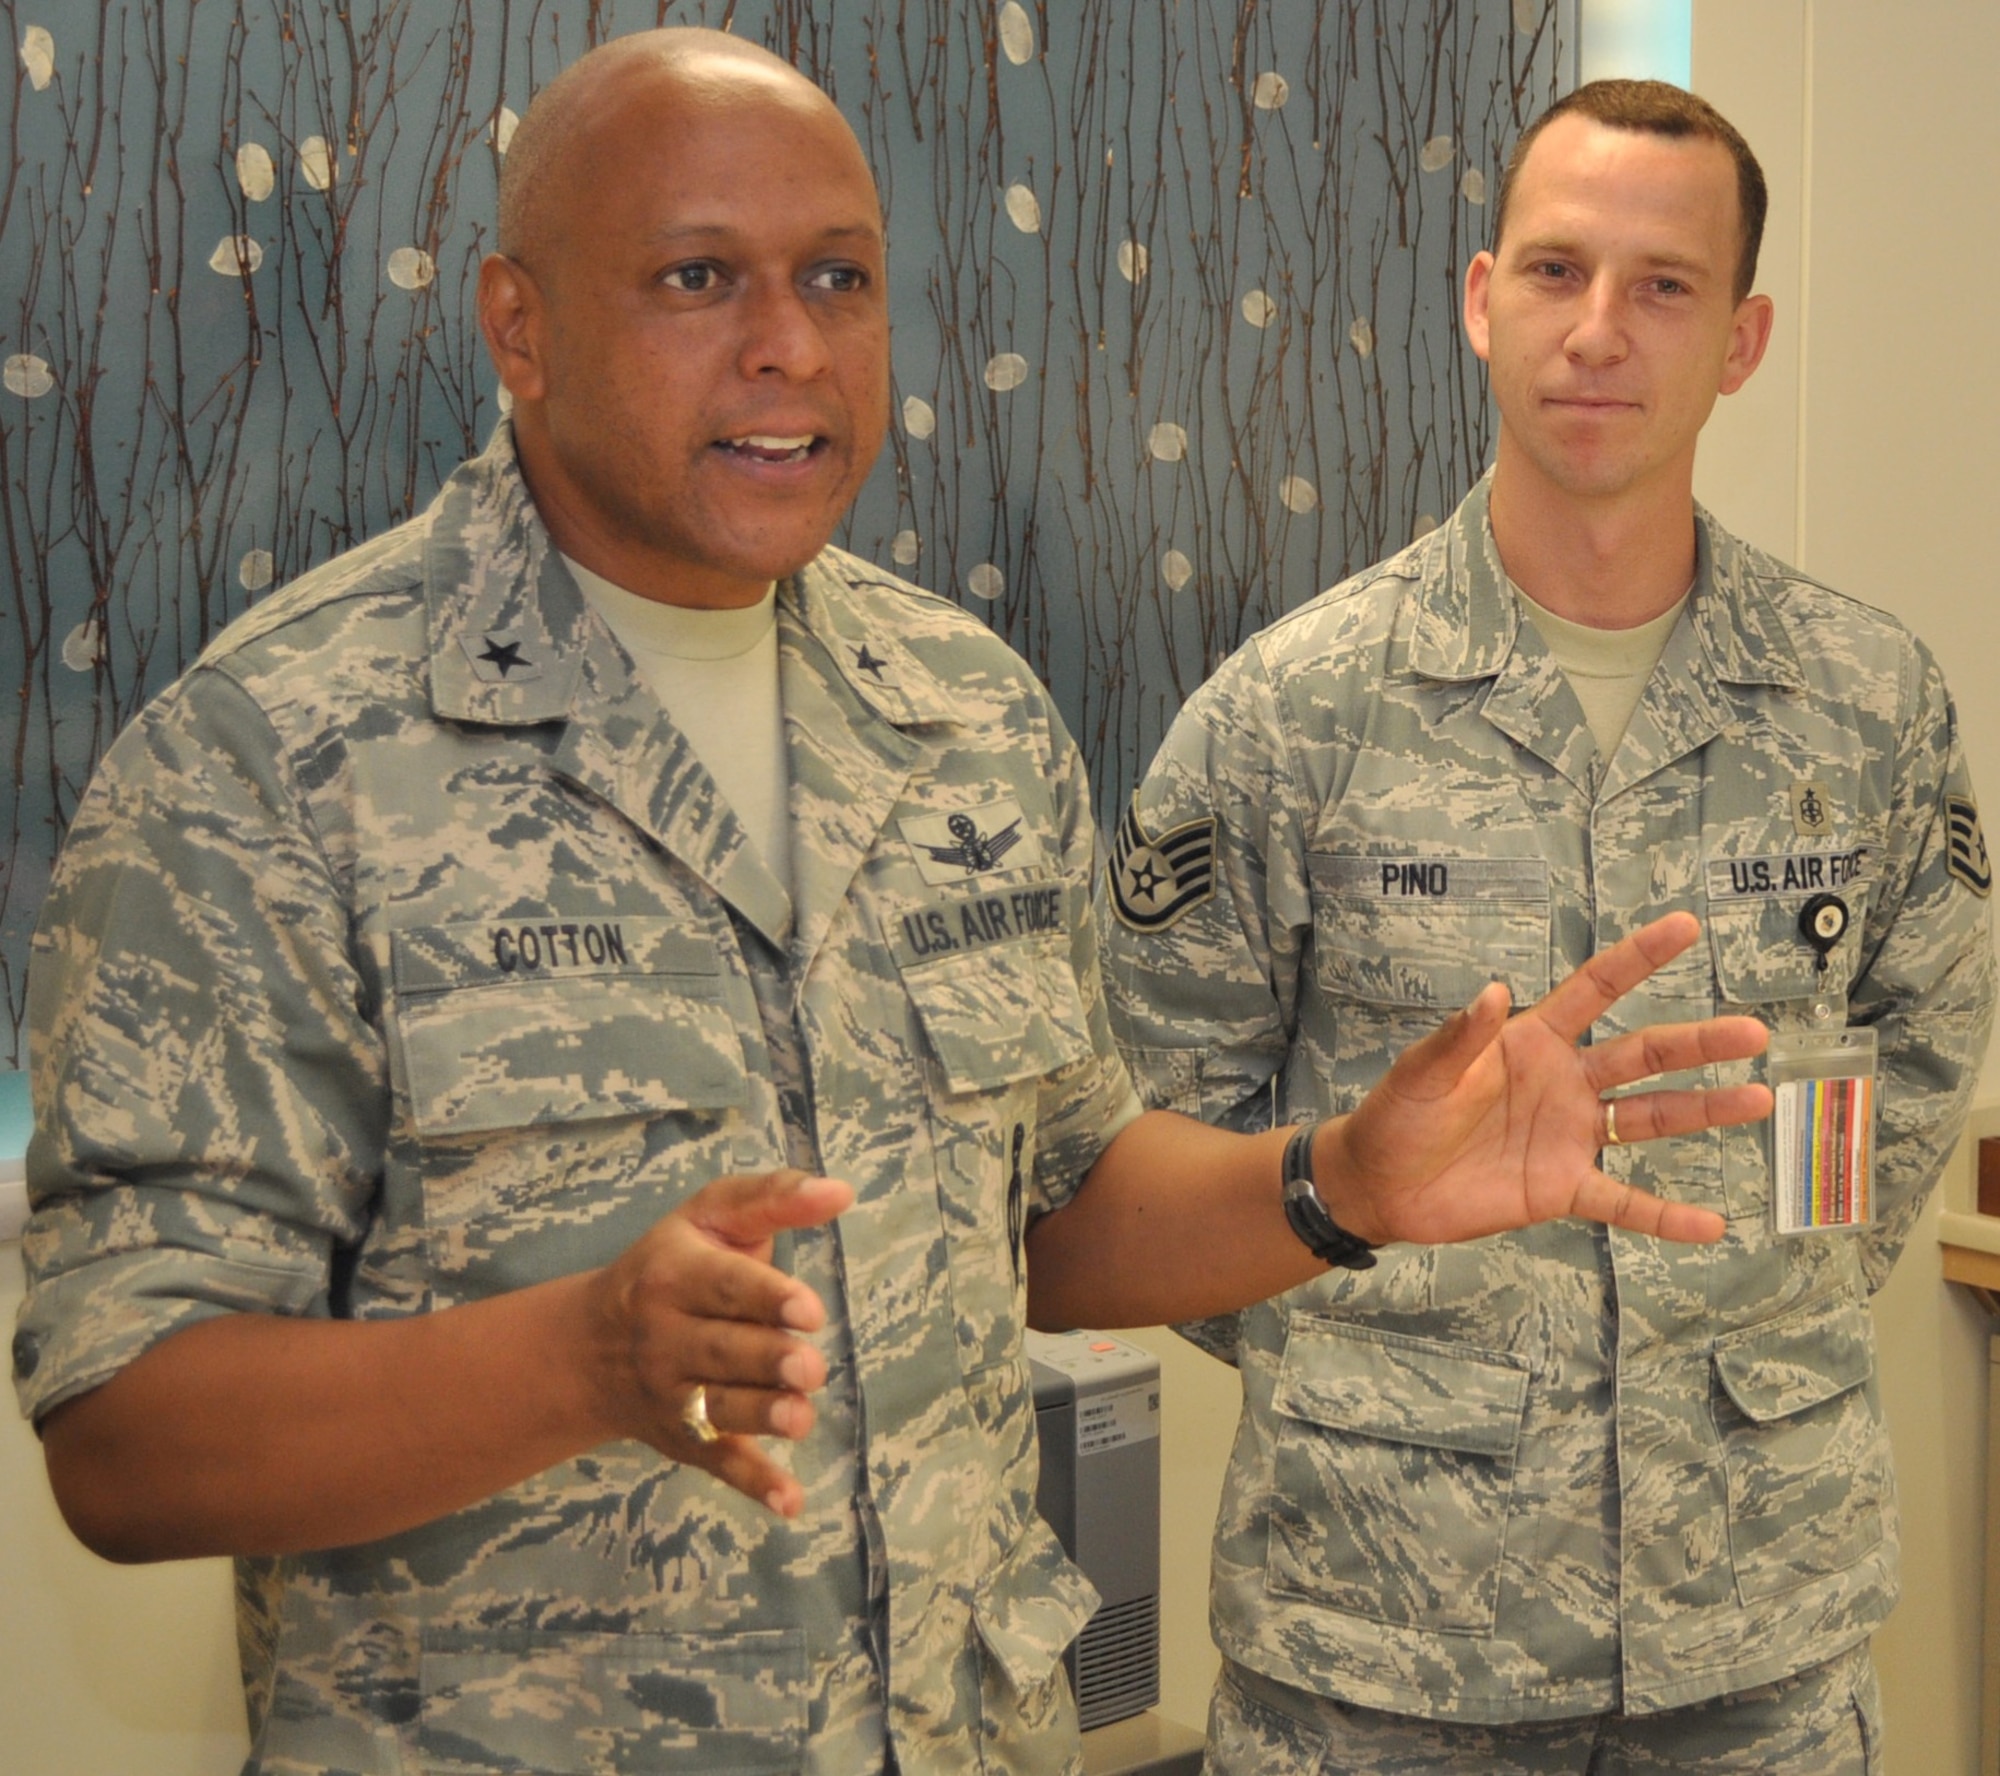 Brig. Gen. Anthony Cotton, 45th Space Wing commander, congratulates Staff Sgt. Jesus Pino, 45th Aerospace Medicine Squadron, Sept. 8, after awarding him a commander’s coin for his part in the rescue and treatment of a stabbing victim from a car sinking in the Indian River, just a few miles from Patrick AFB. Master Sgt. Rodney Huffman, 45th Space Communications Squadron Superintendent, Master Sgt. Kenneth Swainston, a Reservist with the 920th Rescue Wing at Patrick, and Pino are all credited with helping a Brevard County Sheriff’s Deputy rescue and treat the woman Sept. 6, after the deputy had just shot a suspect who had been stabbing the woman in the passenger seat of the partially submerged car. (U.S. Air Force photo/Jack Trimboli)